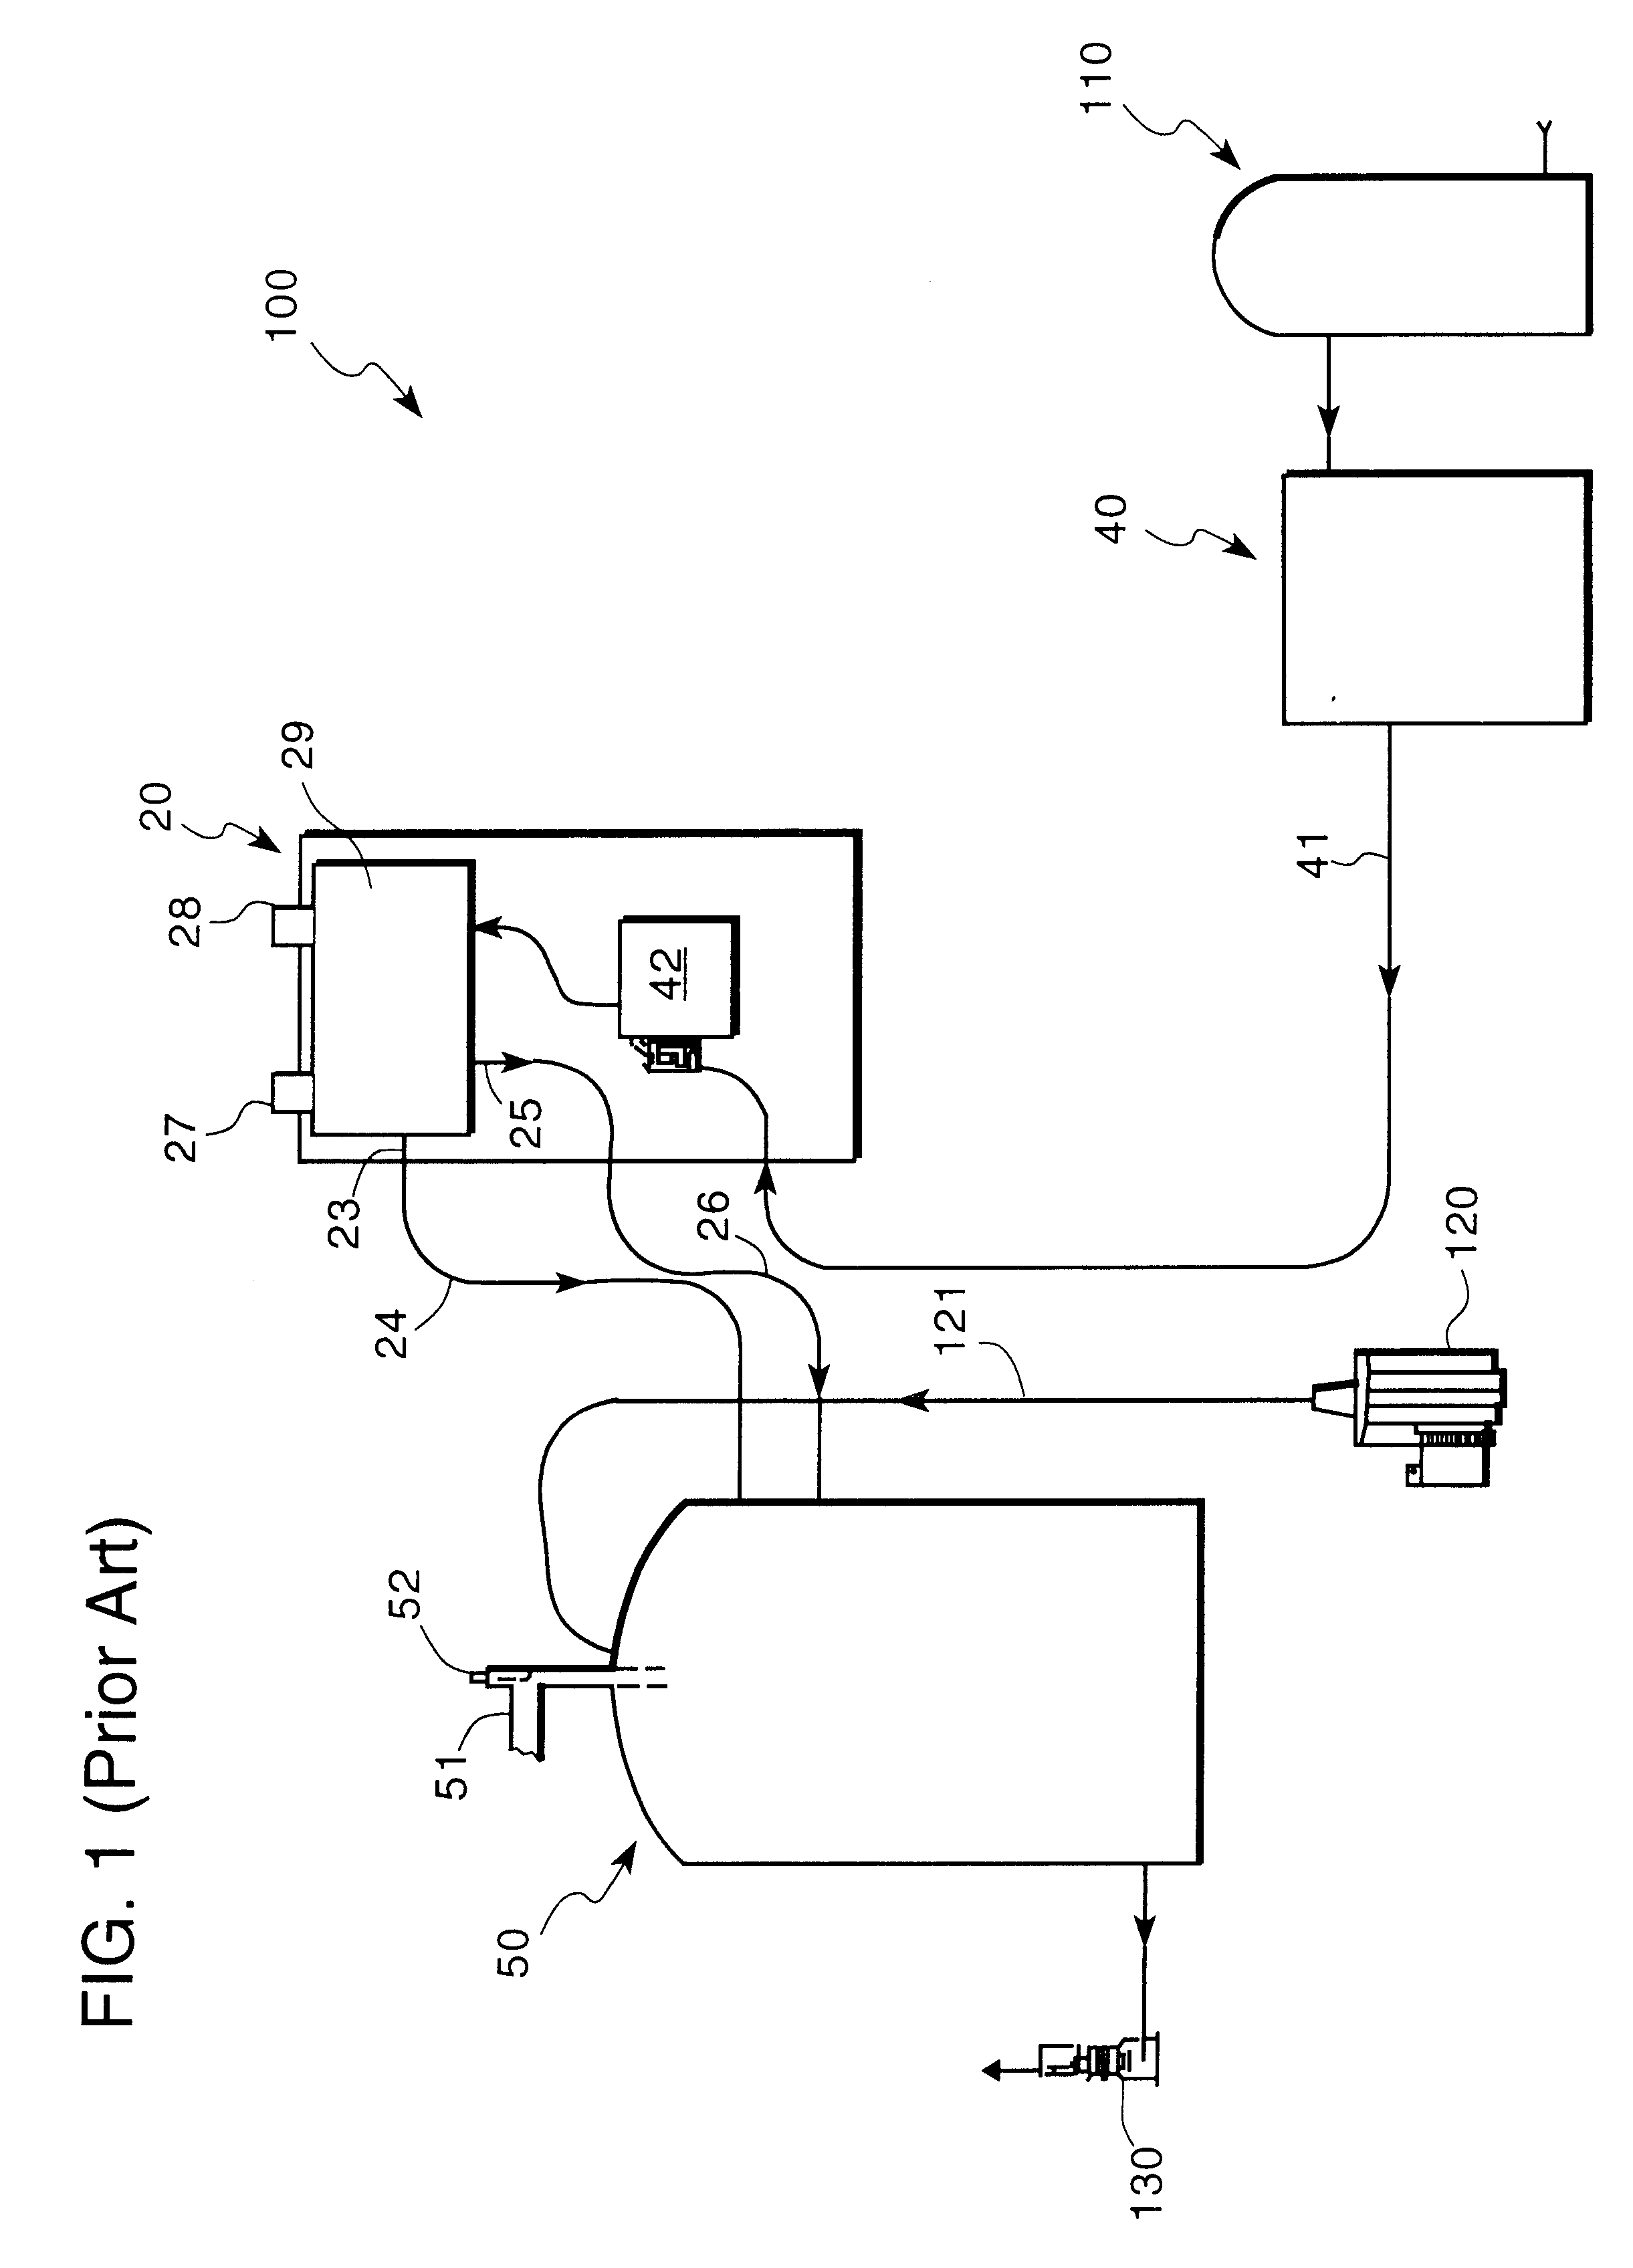 Apparatus and method for venting hydrogen from an electrolytic cell